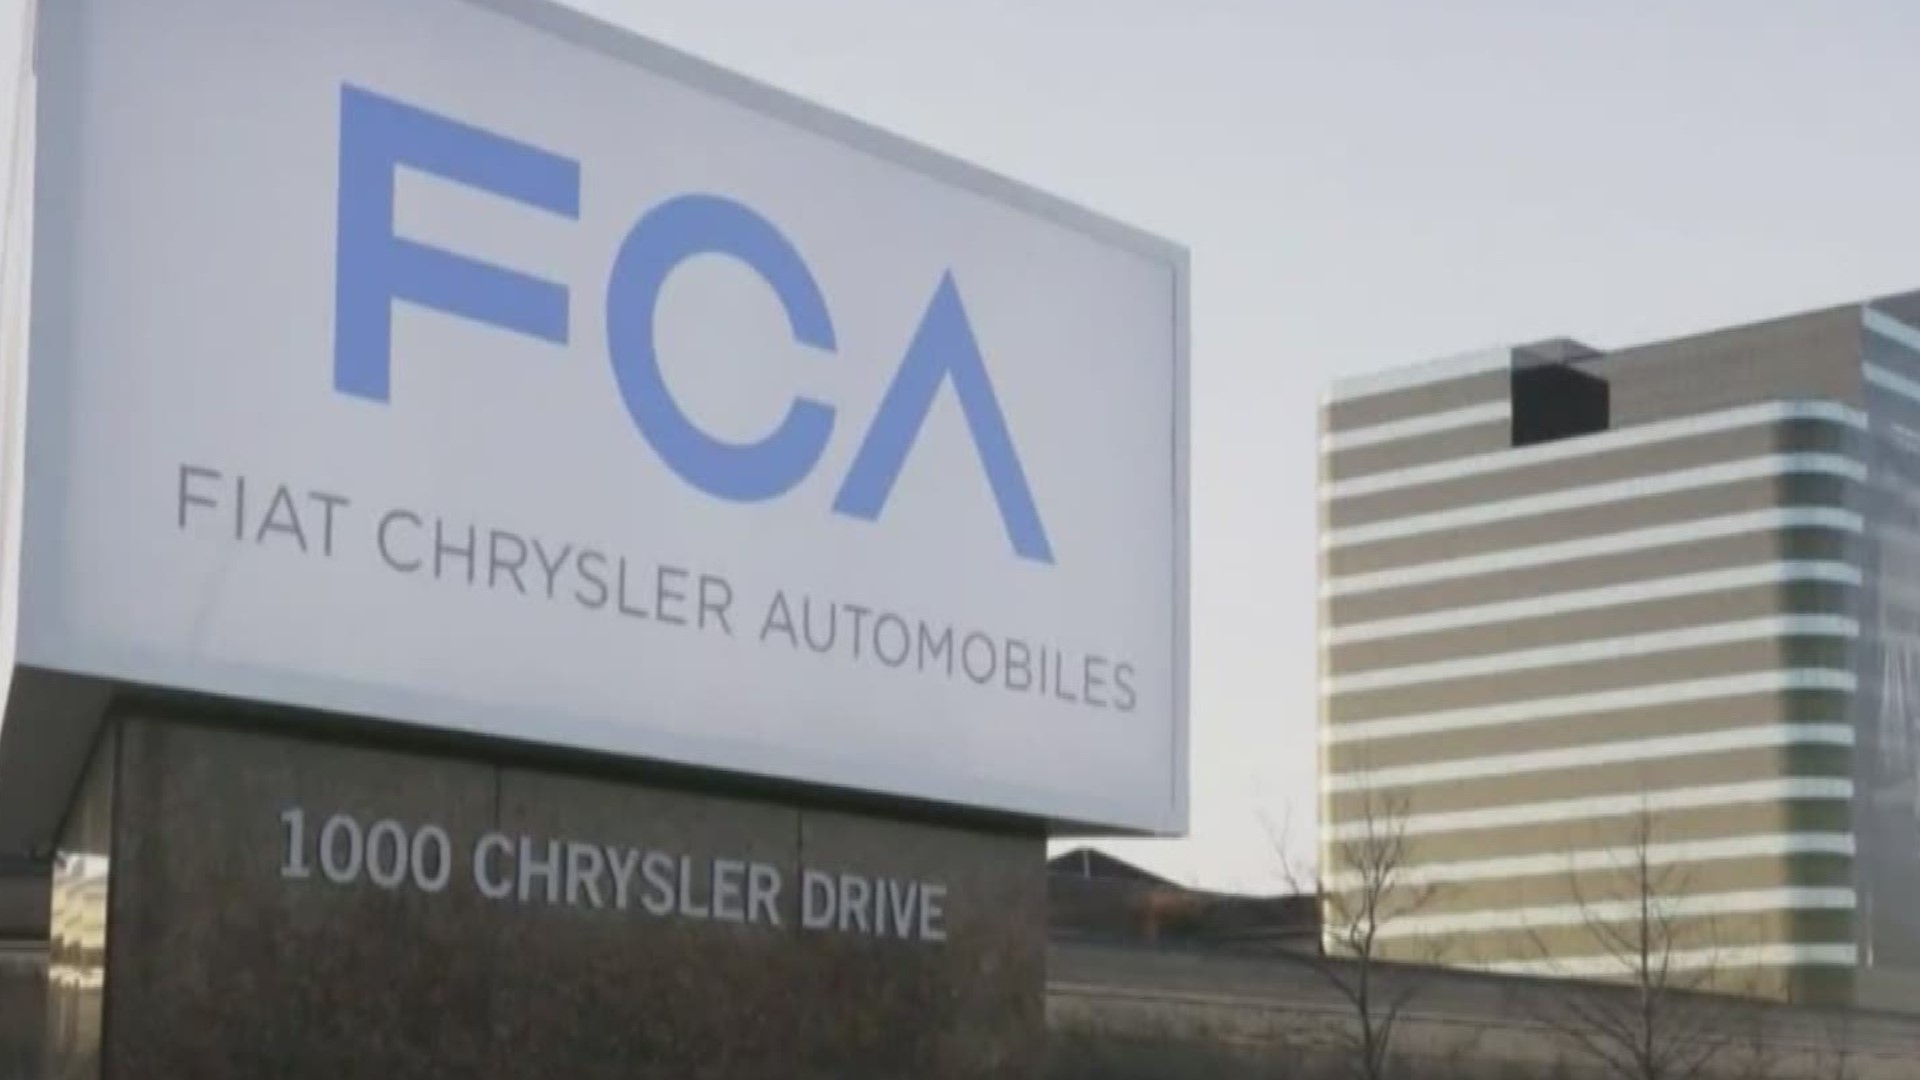 A spokesman for Fiat Chrysler has yet to return calls regarding the report, which is said to involve PSA Group of France.